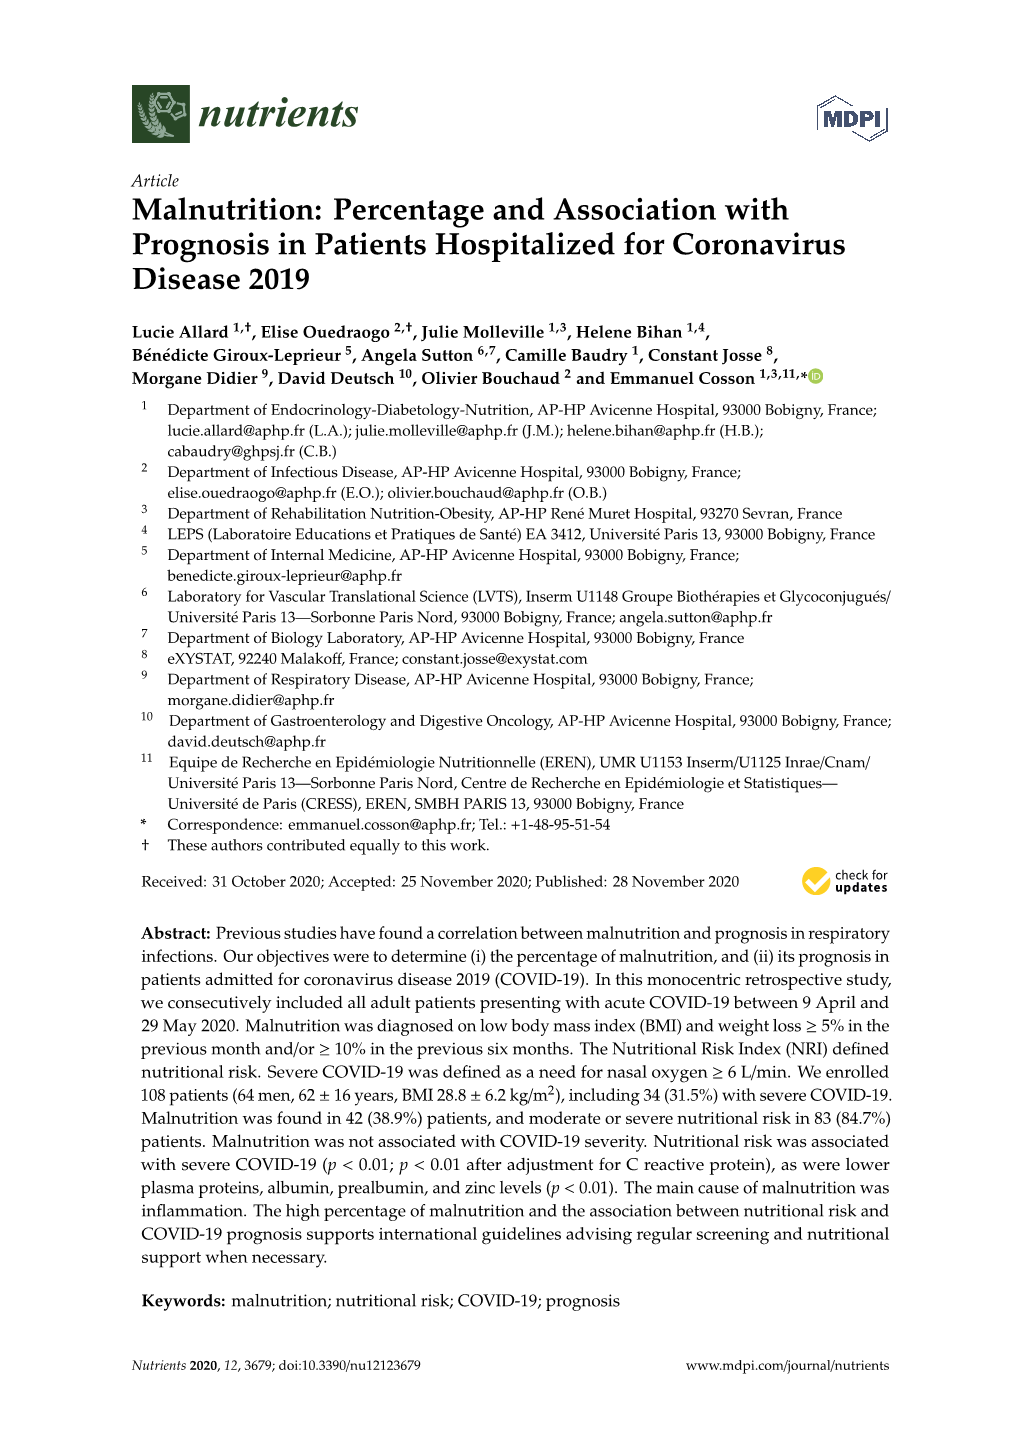 Malnutrition: Percentage and Association with Prognosis in Patients Hospitalized for Coronavirus Disease 2019